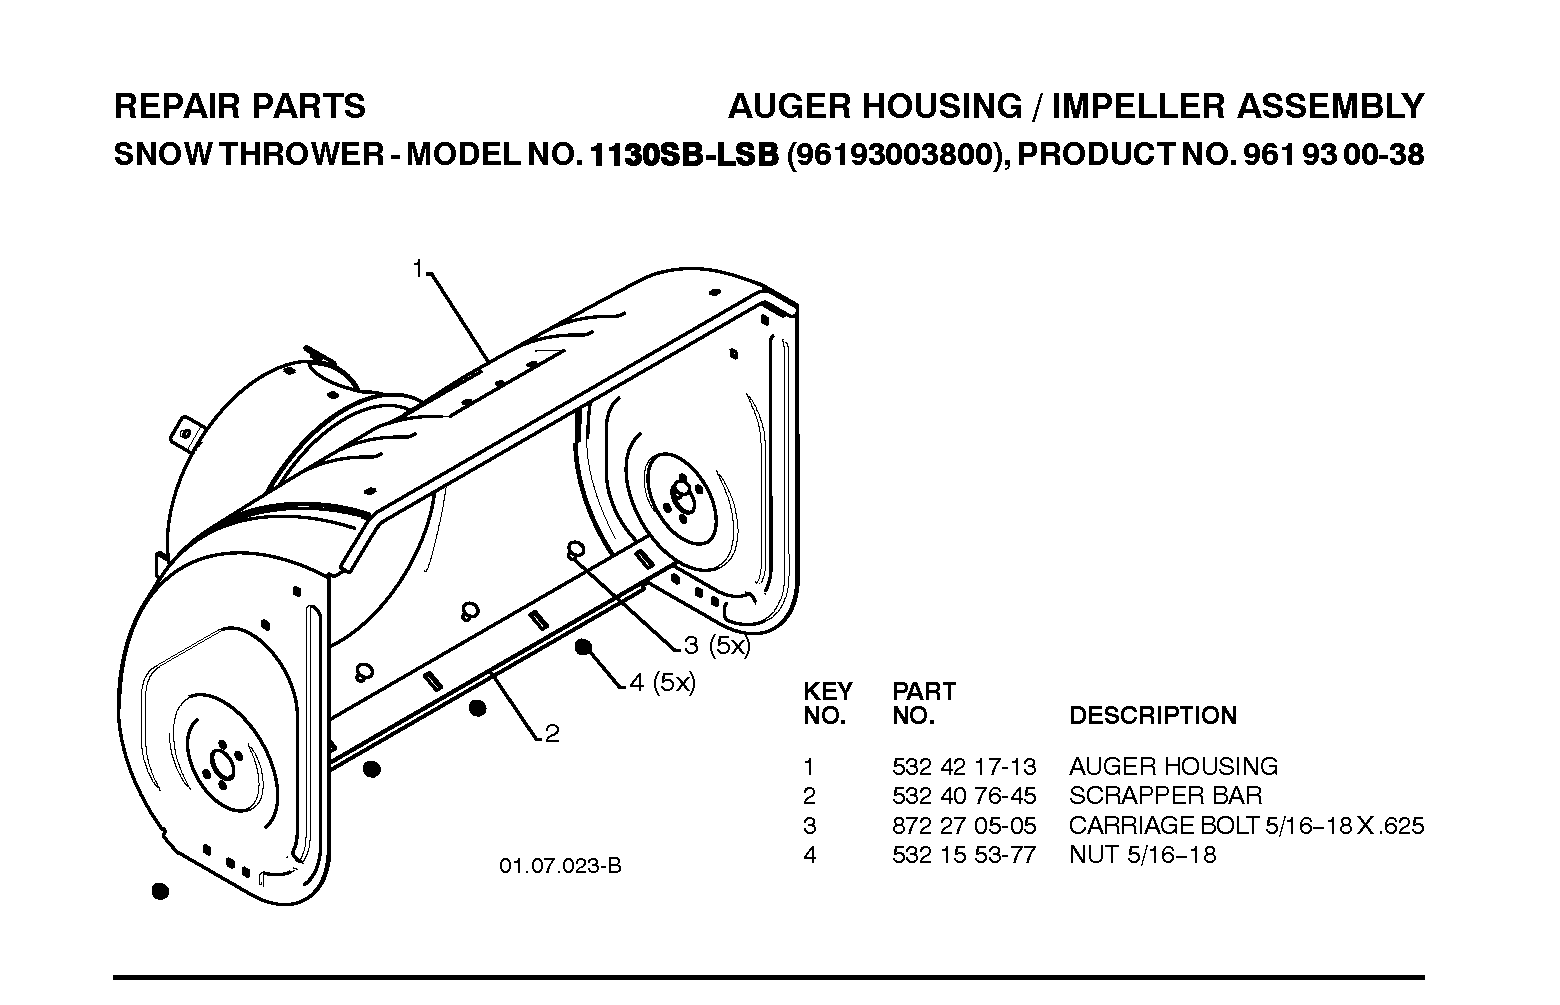 Auger housing and impeller 532421713, 532435830, 872270505, 532155377